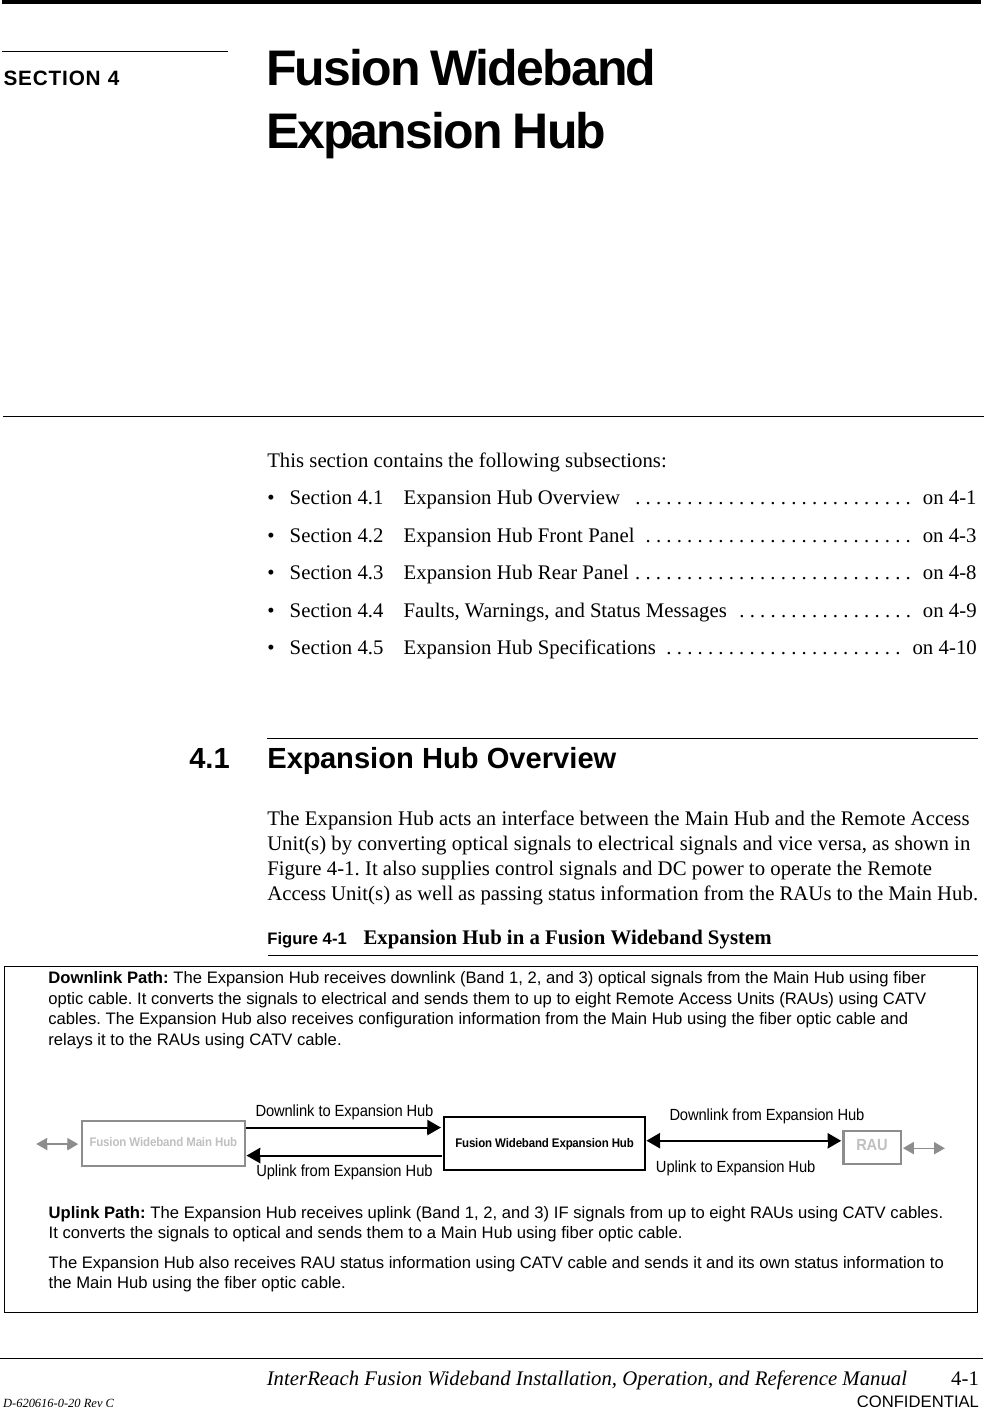 InterReach Fusion Wideband Installation, Operation, and Reference Manual 4-1D-620616-0-20 Rev C CONFIDENTIALSECTION 4 Fusion Wideband Expansion HubThis section contains the following subsections:• Section 4.1   Expansion Hub Overview   . . . . . . . . . . . . . . . . . . . . . . . . . . .  on 4-1• Section 4.2   Expansion Hub Front Panel  . . . . . . . . . . . . . . . . . . . . . . . . . .  on 4-3• Section 4.3   Expansion Hub Rear Panel . . . . . . . . . . . . . . . . . . . . . . . . . . .  on 4-8• Section 4.4   Faults, Warnings, and Status Messages  . . . . . . . . . . . . . . . . .  on 4-9• Section 4.5   Expansion Hub Specifications  . . . . . . . . . . . . . . . . . . . . . . .  on 4-104.1 Expansion Hub OverviewThe Expansion Hub acts an interface between the Main Hub and the Remote Access Unit(s) by converting optical signals to electrical signals and vice versa, as shown in Figure 4-1. It also supplies control signals and DC power to operate the Remote Access Unit(s) as well as passing status information from the RAUs to the Main Hub.Figure 4-1 Expansion Hub in a Fusion Wideband SystemFusion Wideband Expansion HubFusion Wideband Main HubRAUDownlink Path: The Expansion Hub receives downlink (Band 1, 2, and 3) optical signals from the Main Hub using fiber optic cable. It converts the signals to electrical and sends them to up to eight Remote Access Units (RAUs) using CATV cables. The Expansion Hub also receives configuration information from the Main Hub using the fiber optic cable and relays it to the RAUs using CATV cable.Uplink Path: The Expansion Hub receives uplink (Band 1, 2, and 3) IF signals from up to eight RAUs using CATV cables. It converts the signals to optical and sends them to a Main Hub using fiber optic cable.The Expansion Hub also receives RAU status information using CATV cable and sends it and its own status information to the Main Hub using the fiber optic cable.Downlink to Expansion HubUplink from Expansion HubDownlink from Expansion HubUplink to Expansion Hub